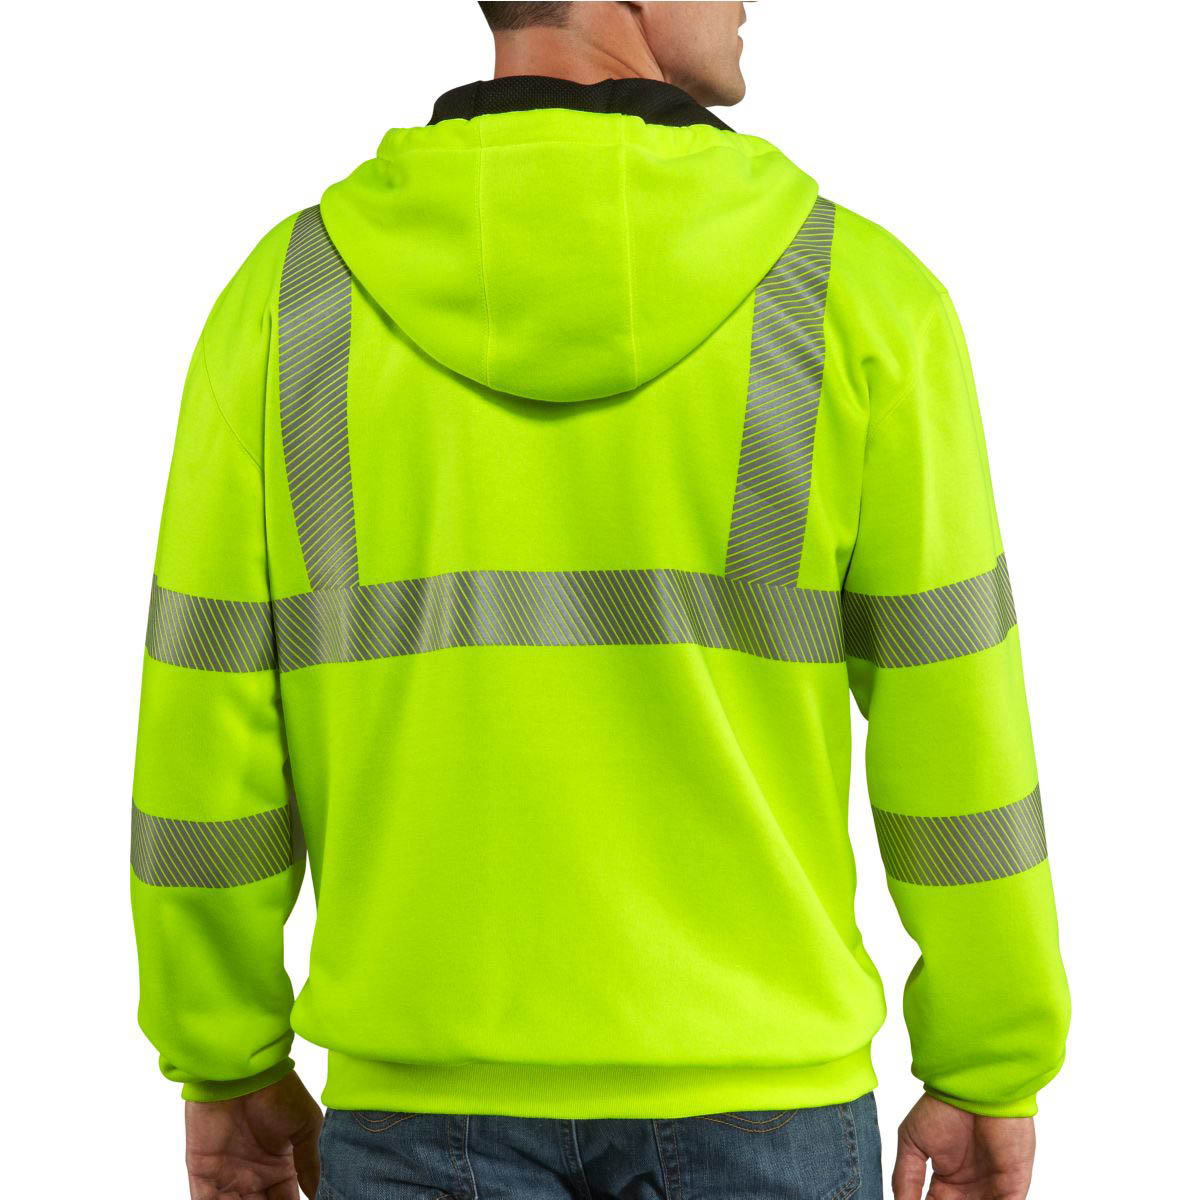 Carhartt Mens High Visibility Zip Front Class 3 Thermal Lined Sweatshirt